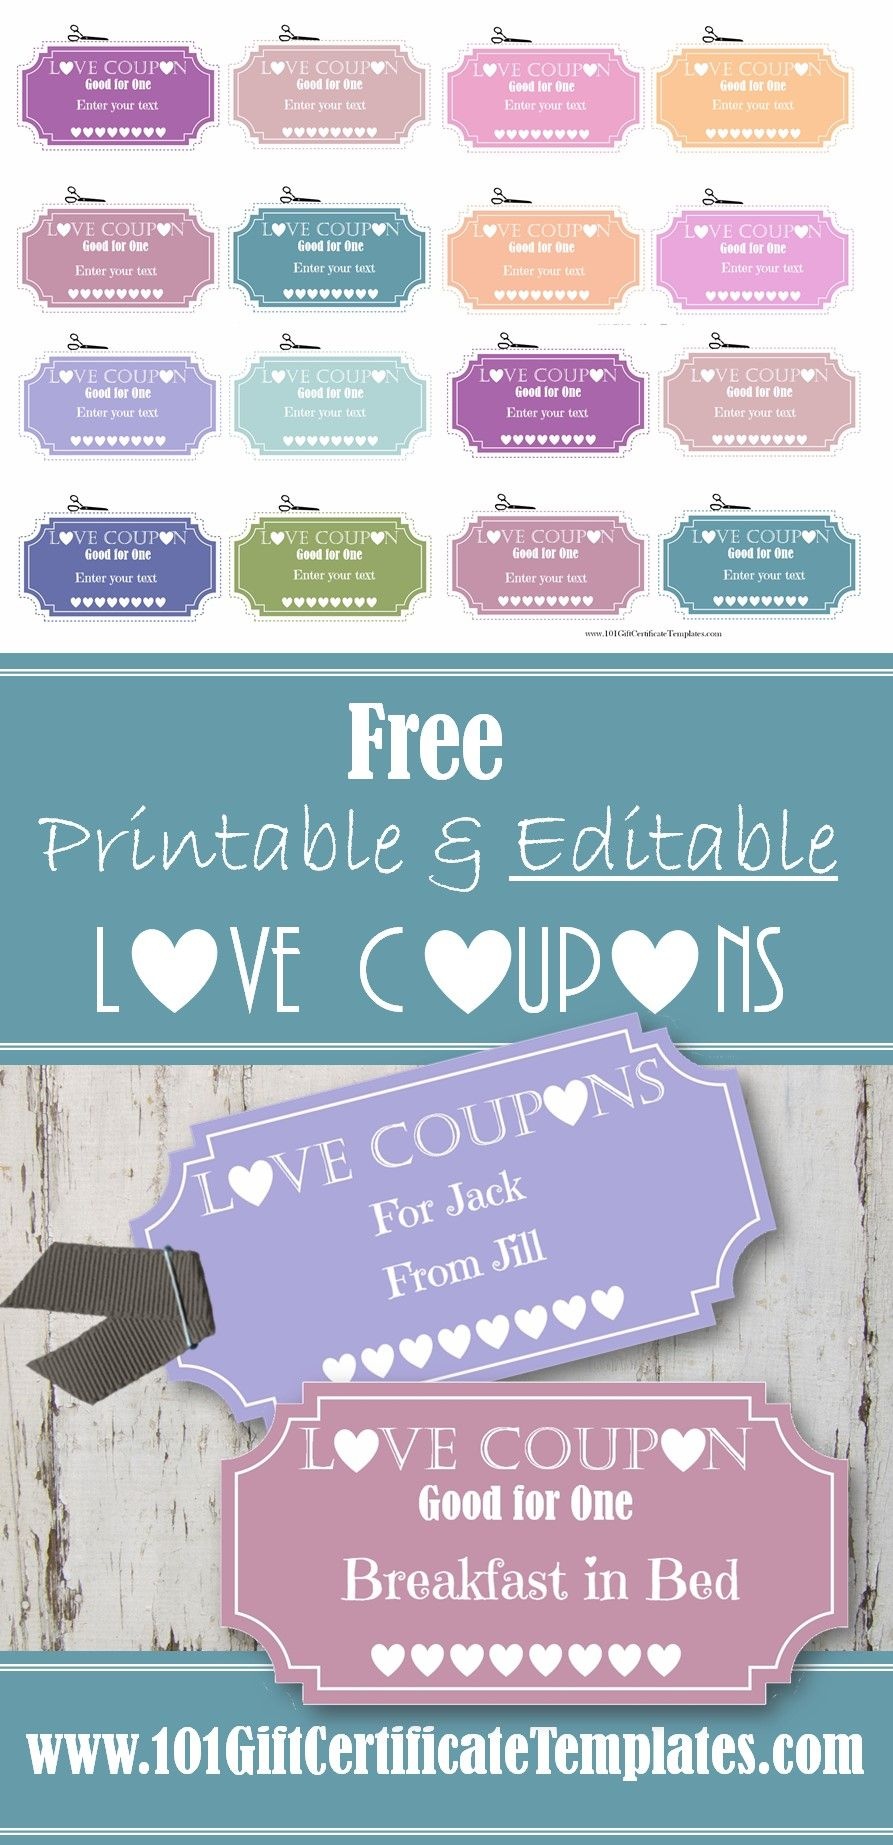 Free Printable And Editable Love Coupons. Instant Download - Free Printable Coupon Book For Boyfriend